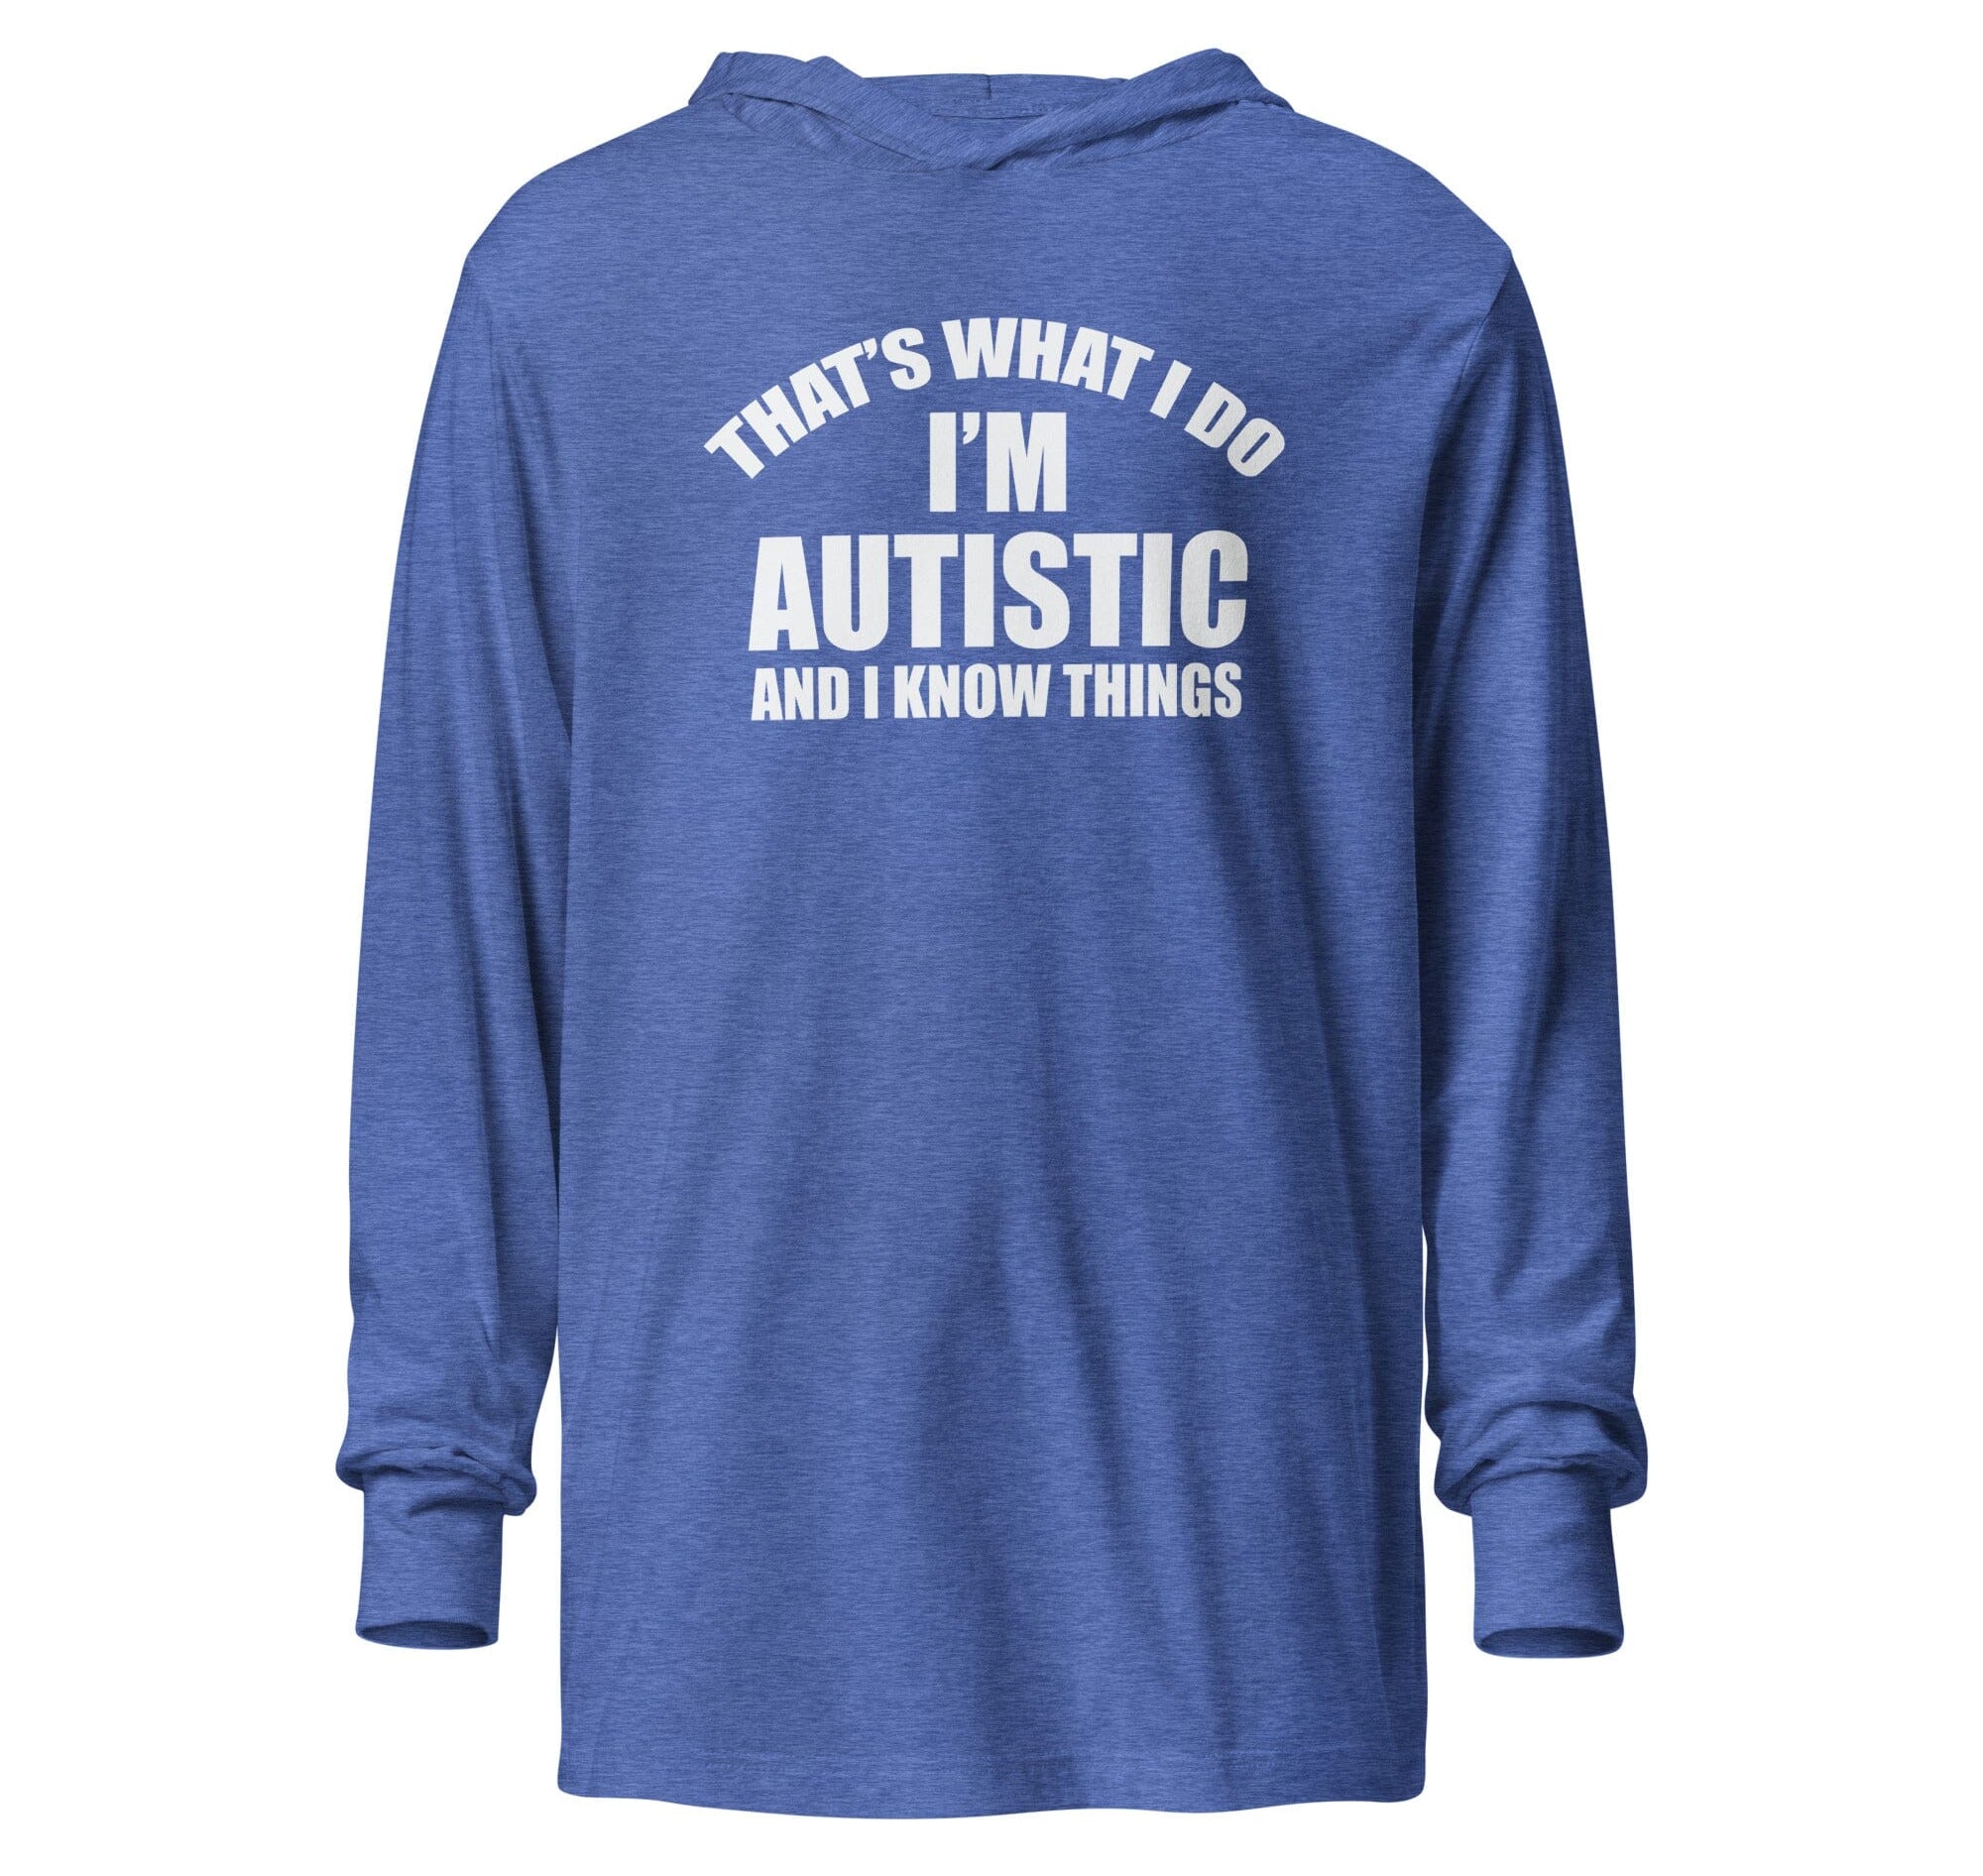 That's What I Do, I'm Autistic and I Know Things Unisex Hooded long-sleeve tee The Autistic Innovator Heather True Royal XS 